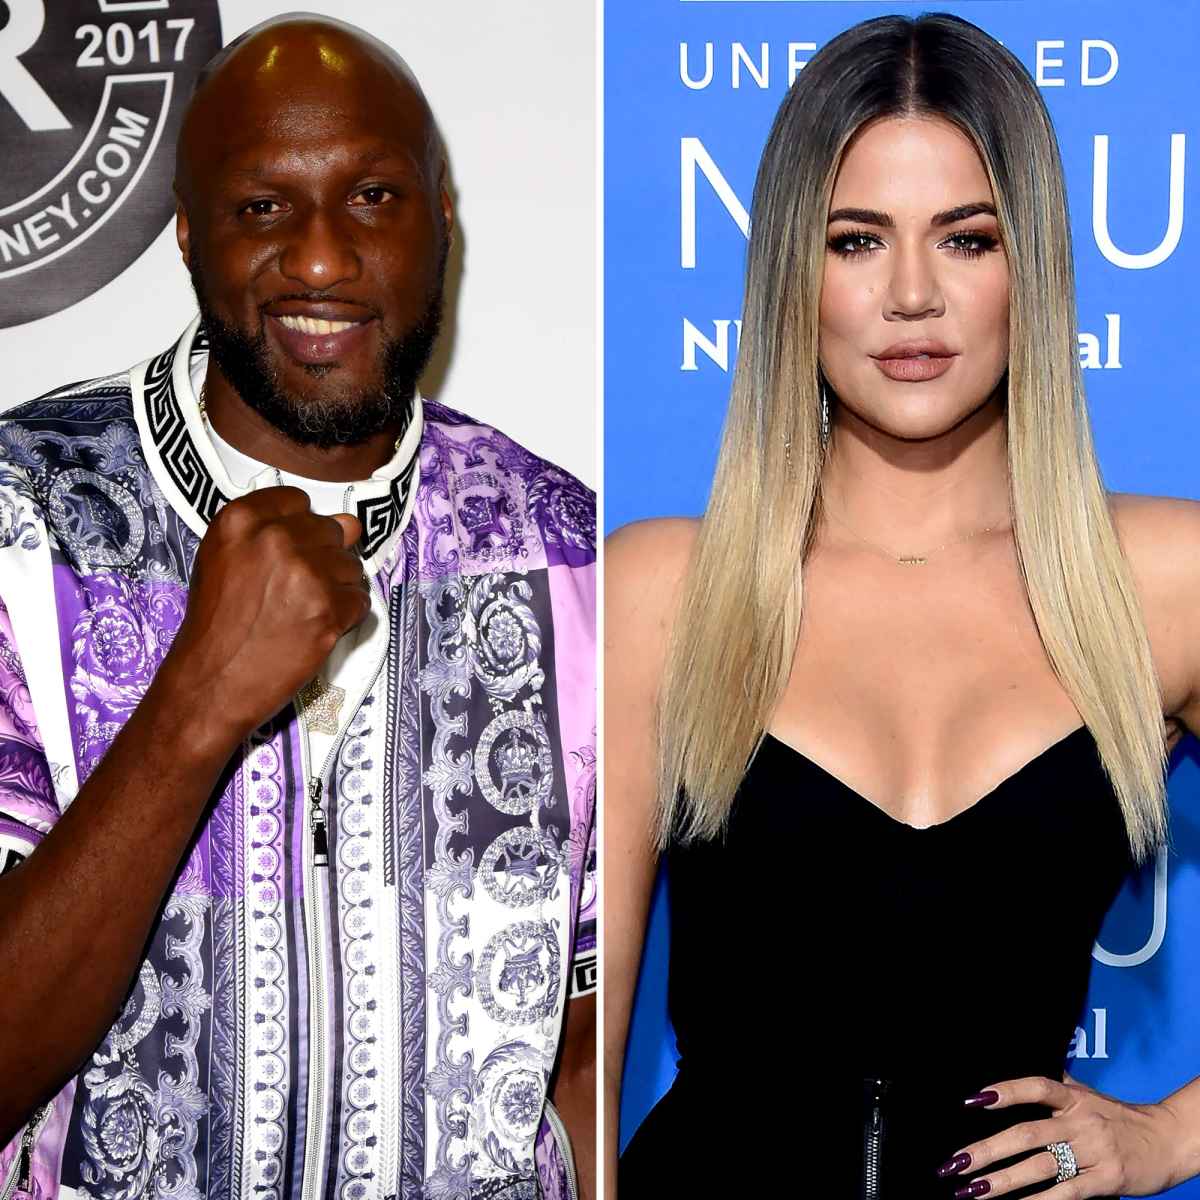 Why Lamar Odom Rarely Saw His Kids When He Was Married to Khloé Kardashian